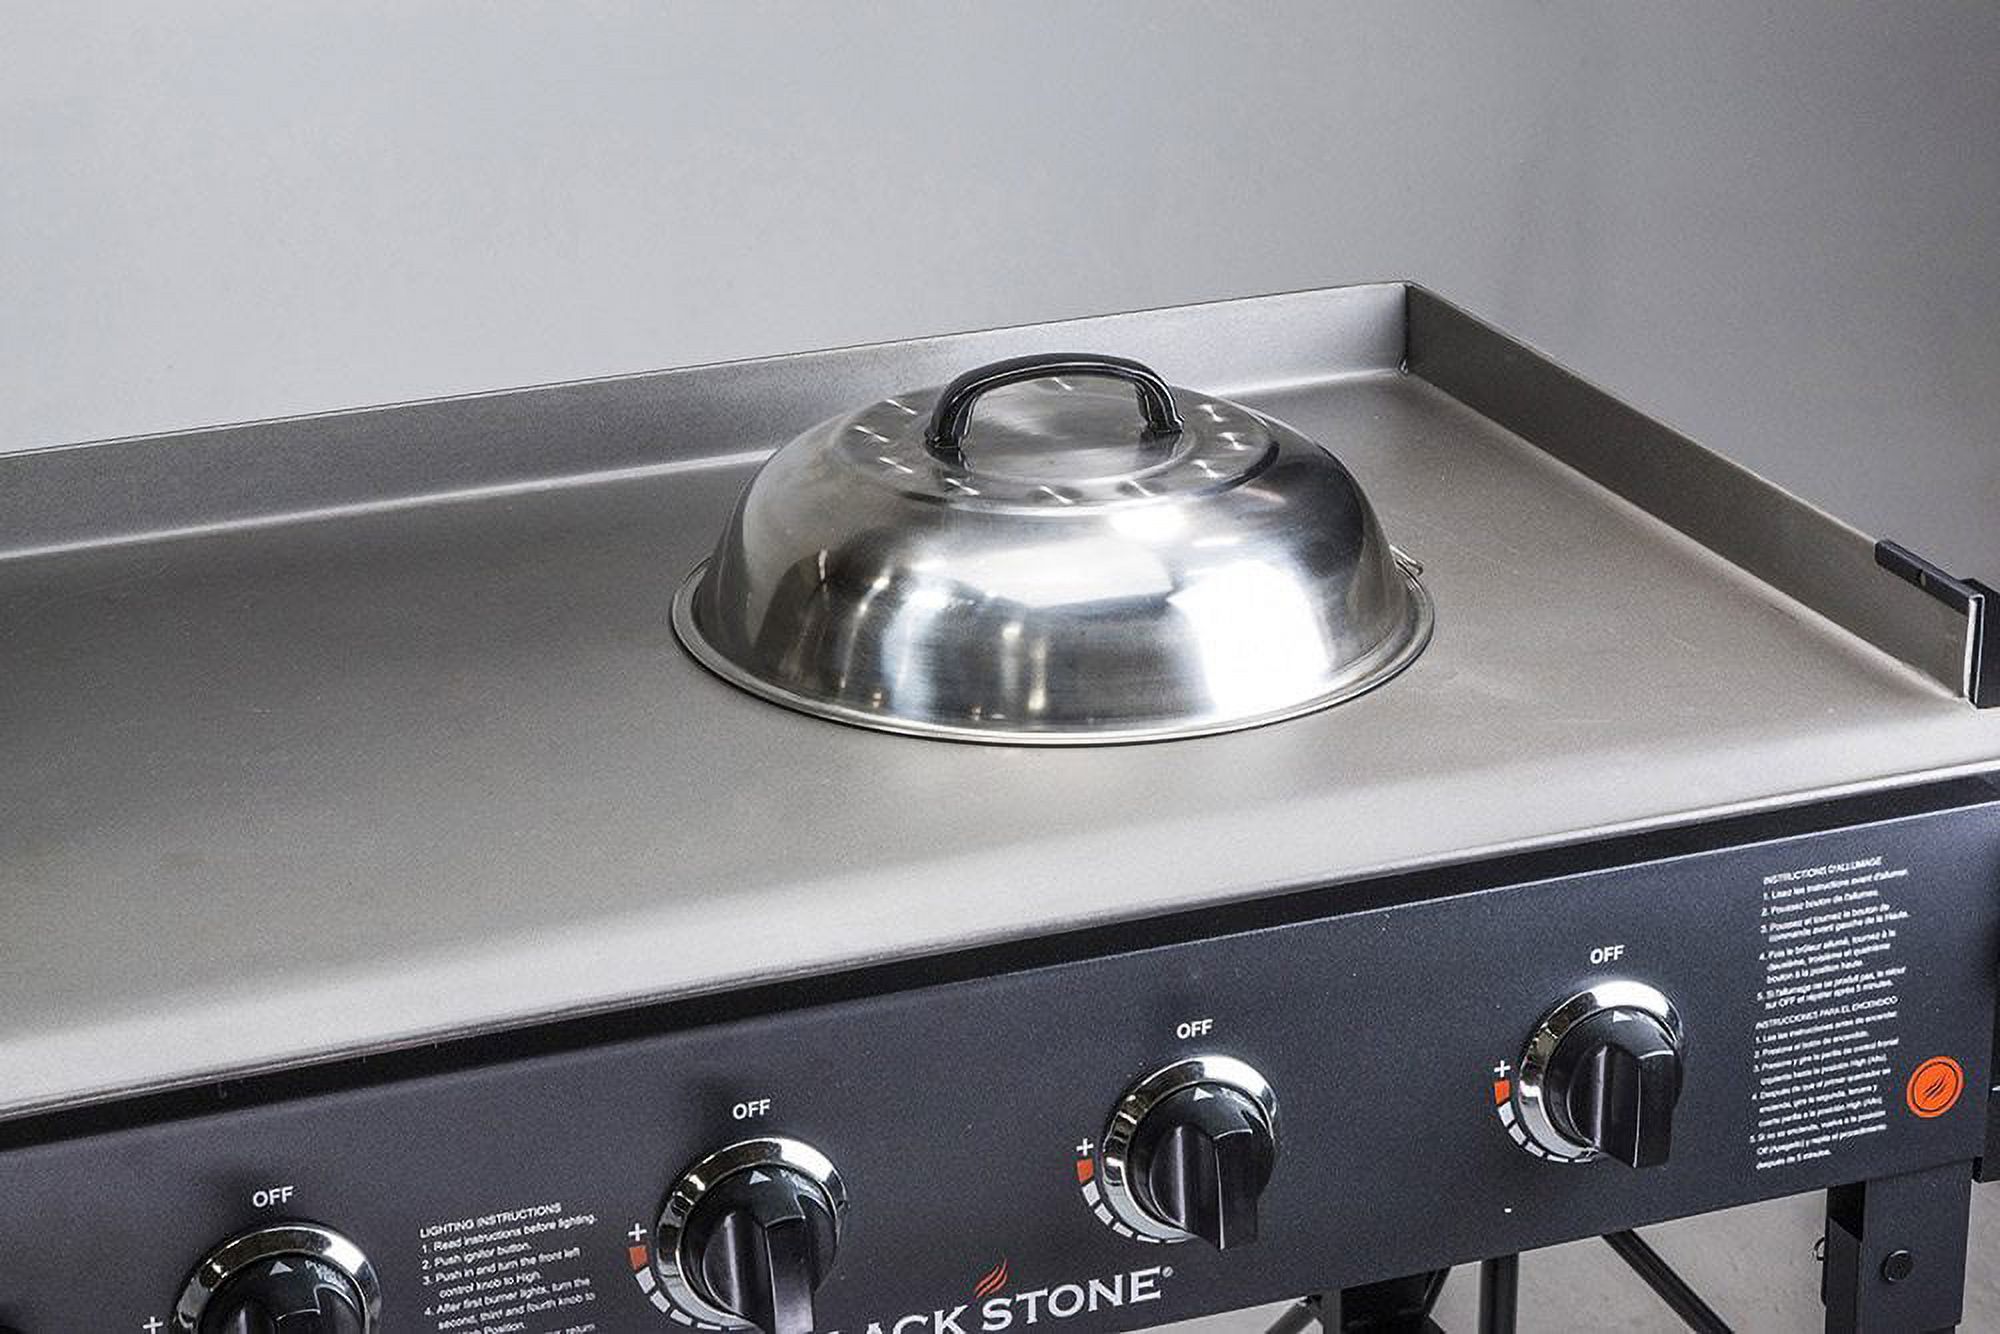 Blackstone 12" Round Basting/Melting/Steaming Cover, Stainless Steel - image 2 of 4